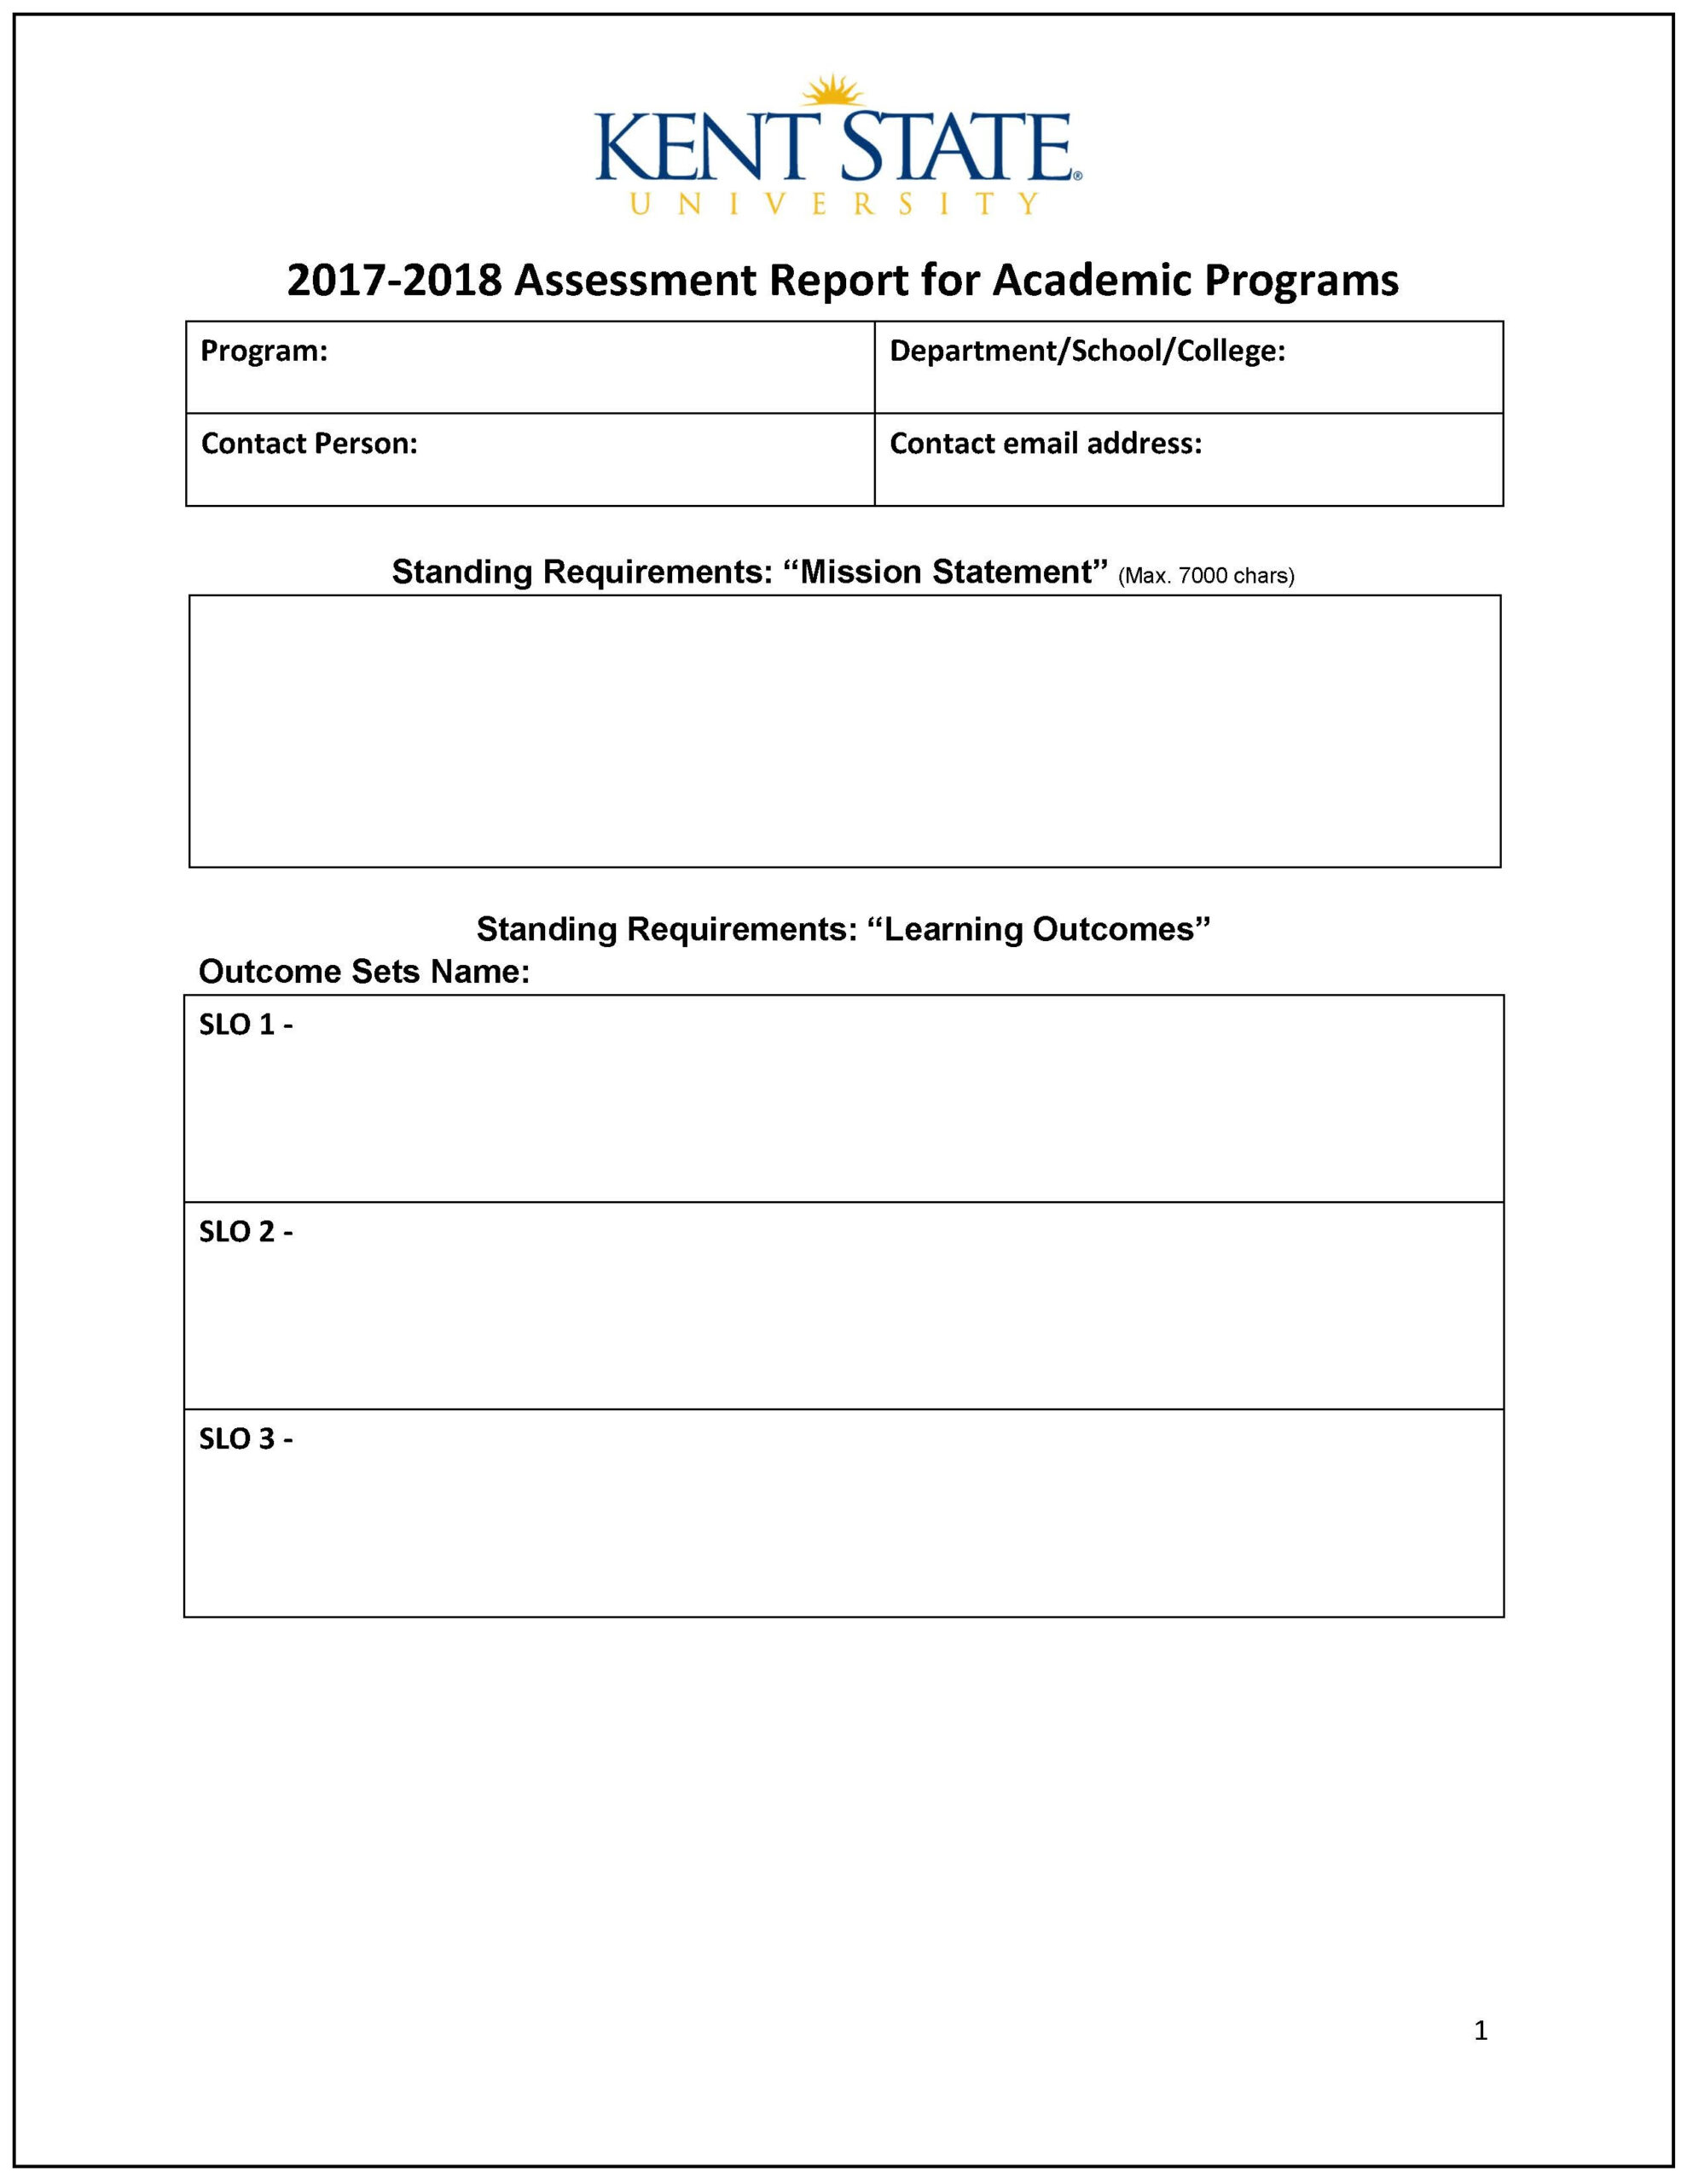 Assessment Report - Word Template  Kent State University Pertaining To Template For Information Report